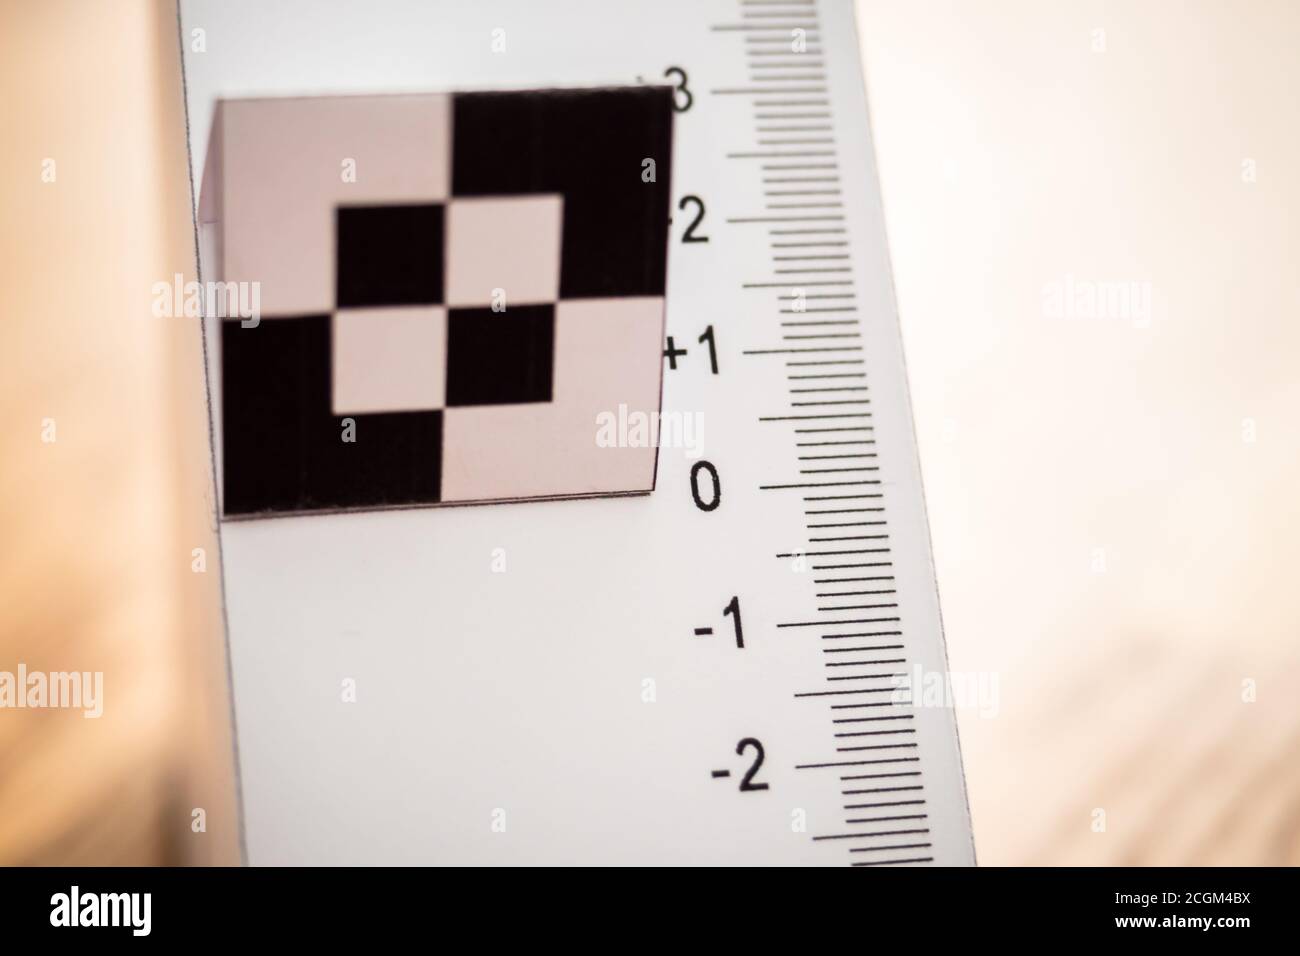 Paper chart for auto focus calibration of a camera Horizontal Stock Photo - Alamy